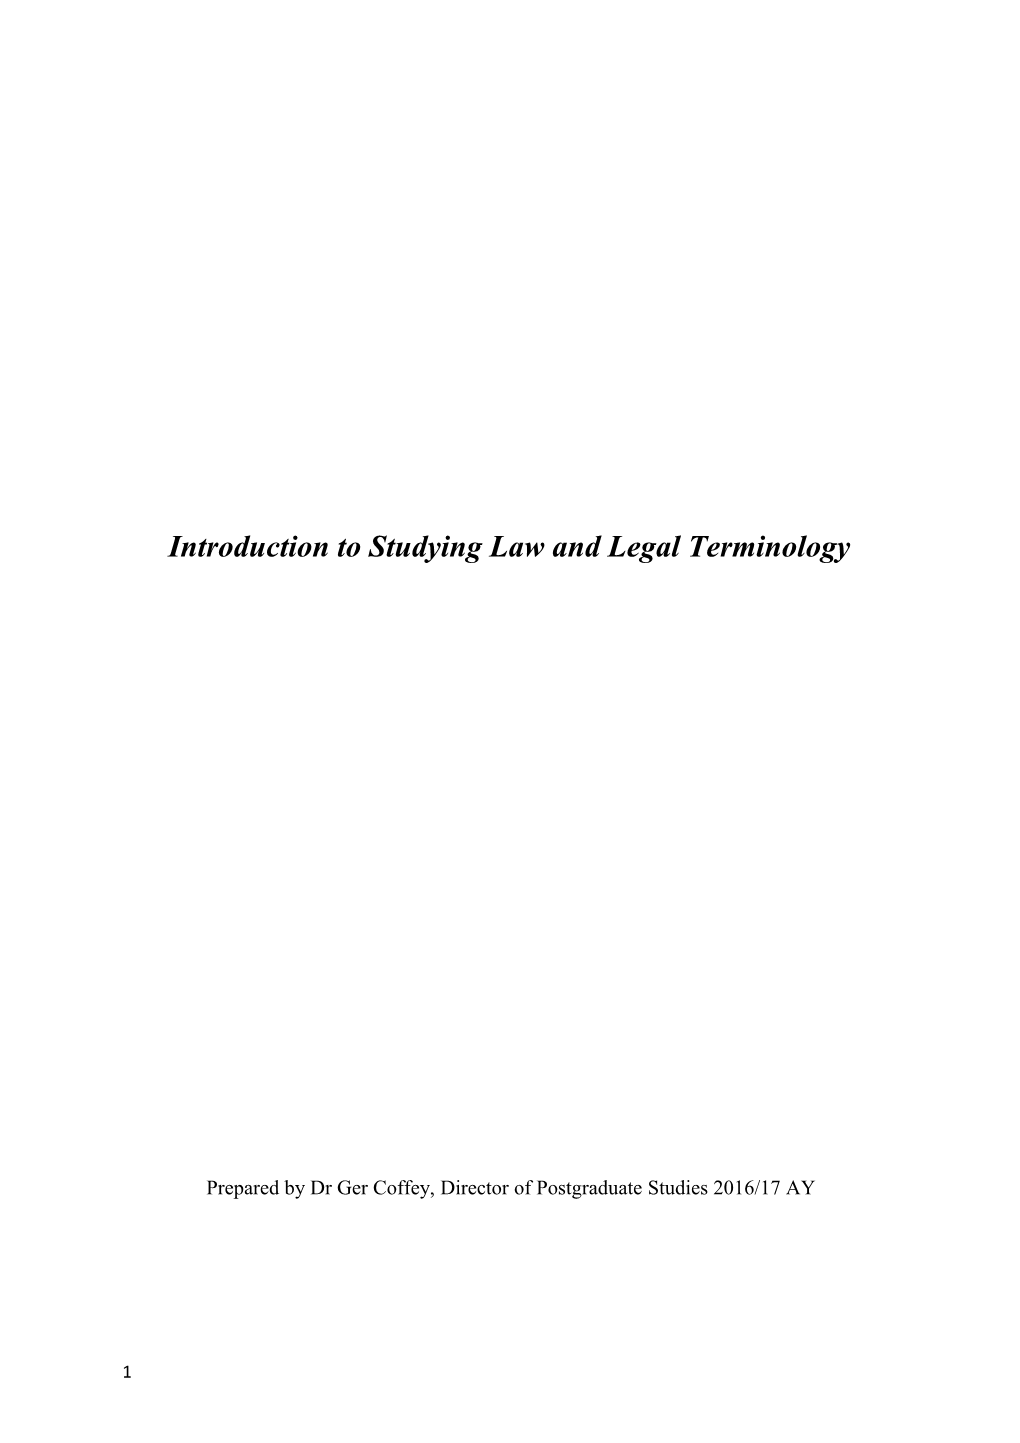 Introduction to Studying Law and Legal Terminology